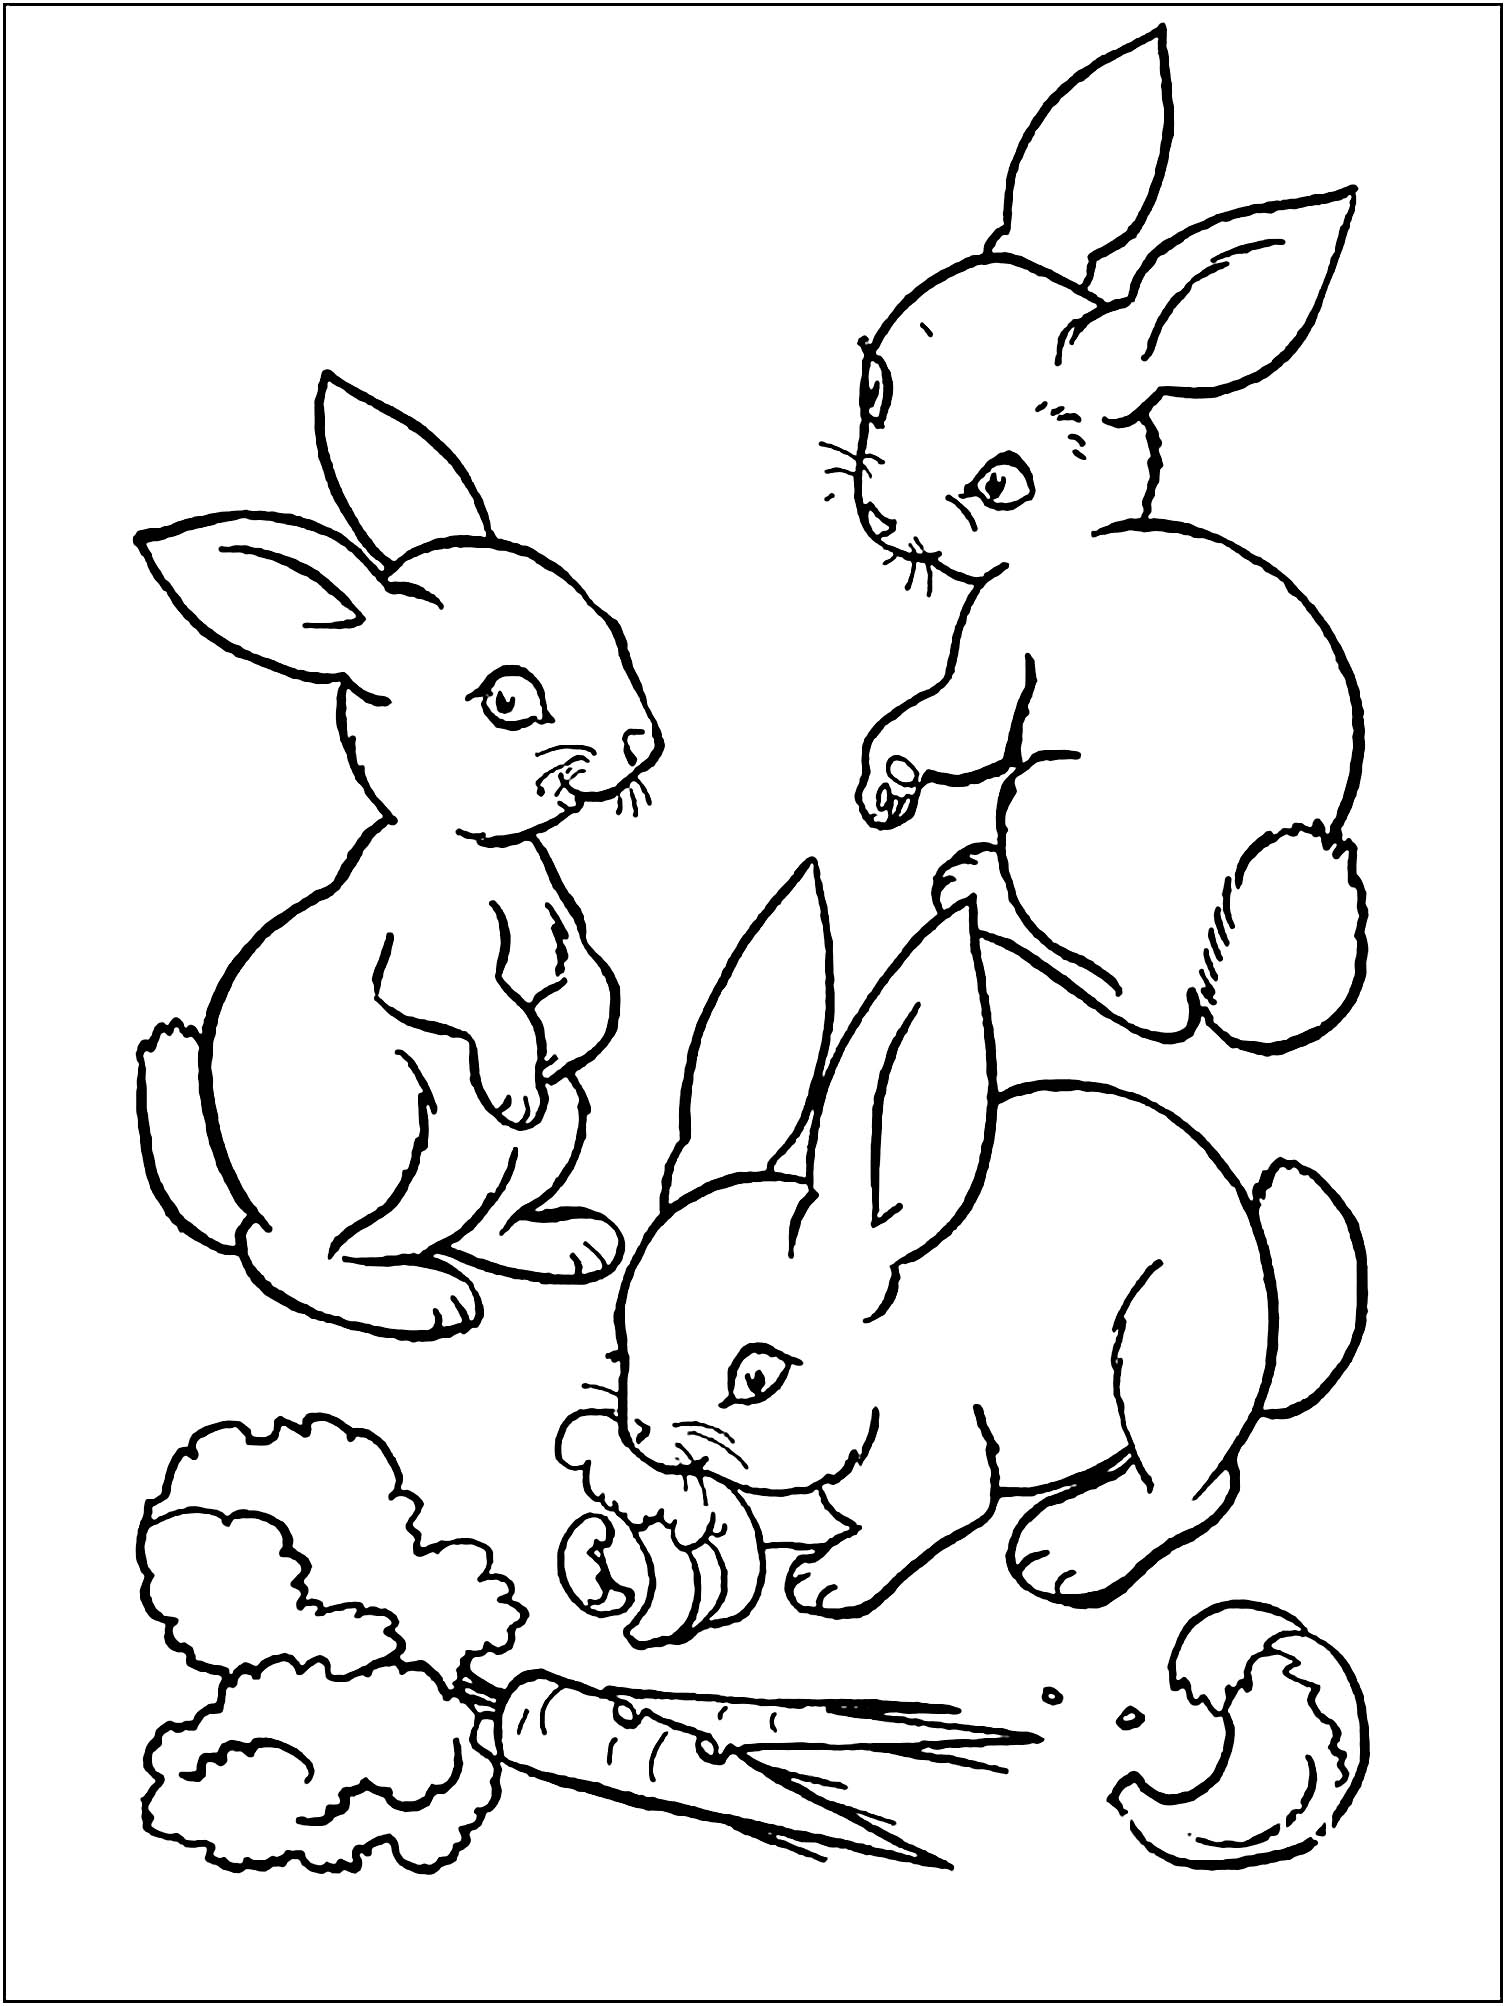 Printable rabbit coloring pages for kids Rabbit Kids Coloring Pages